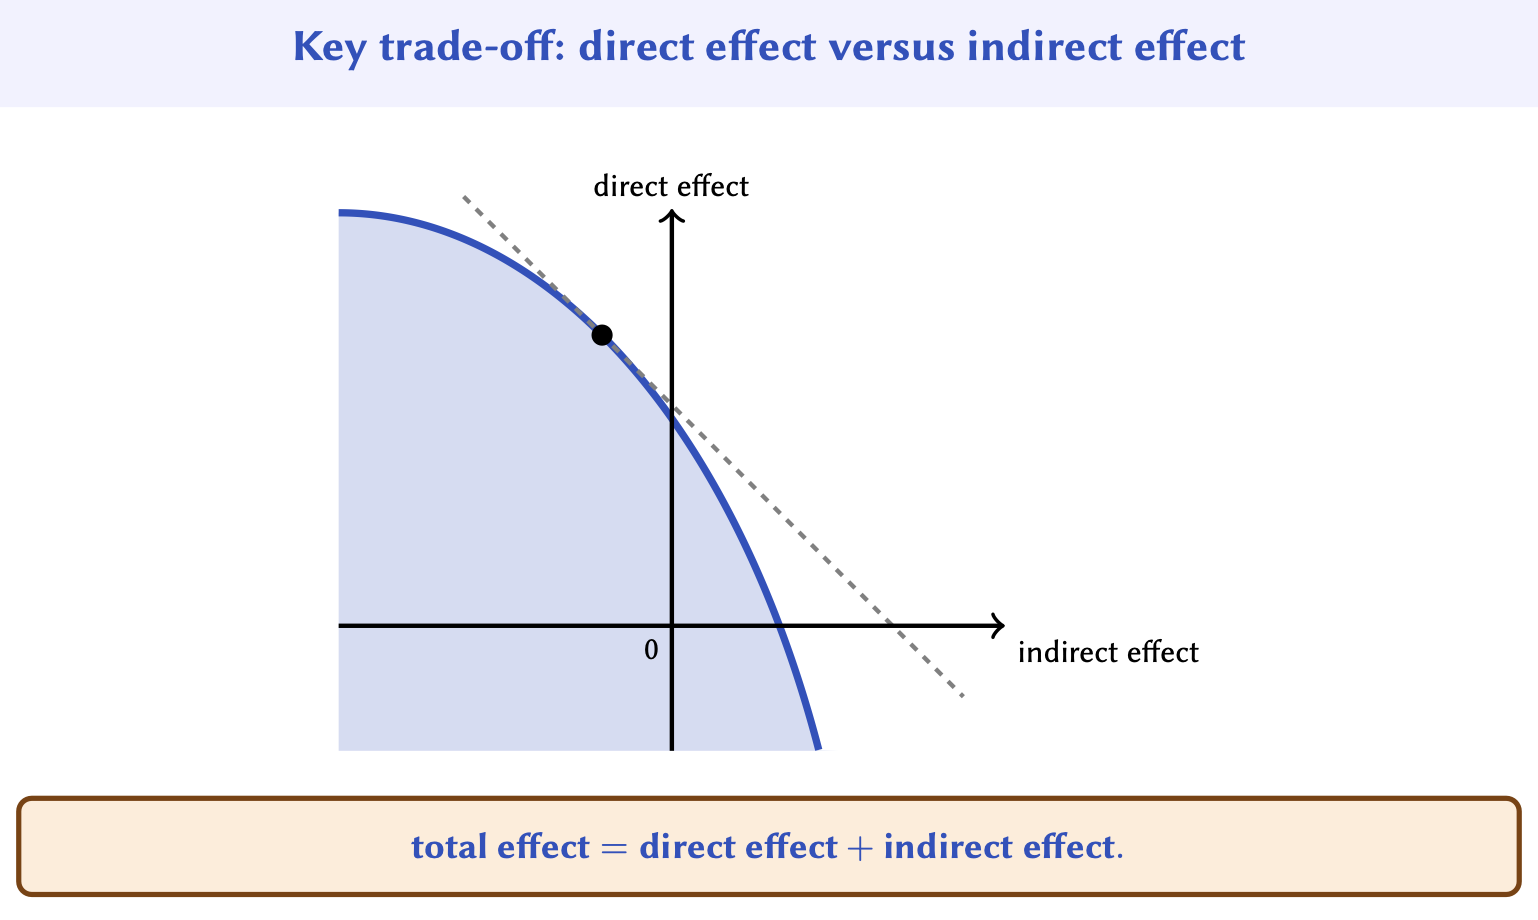 Trade-off between the direct effect and the indirect effect